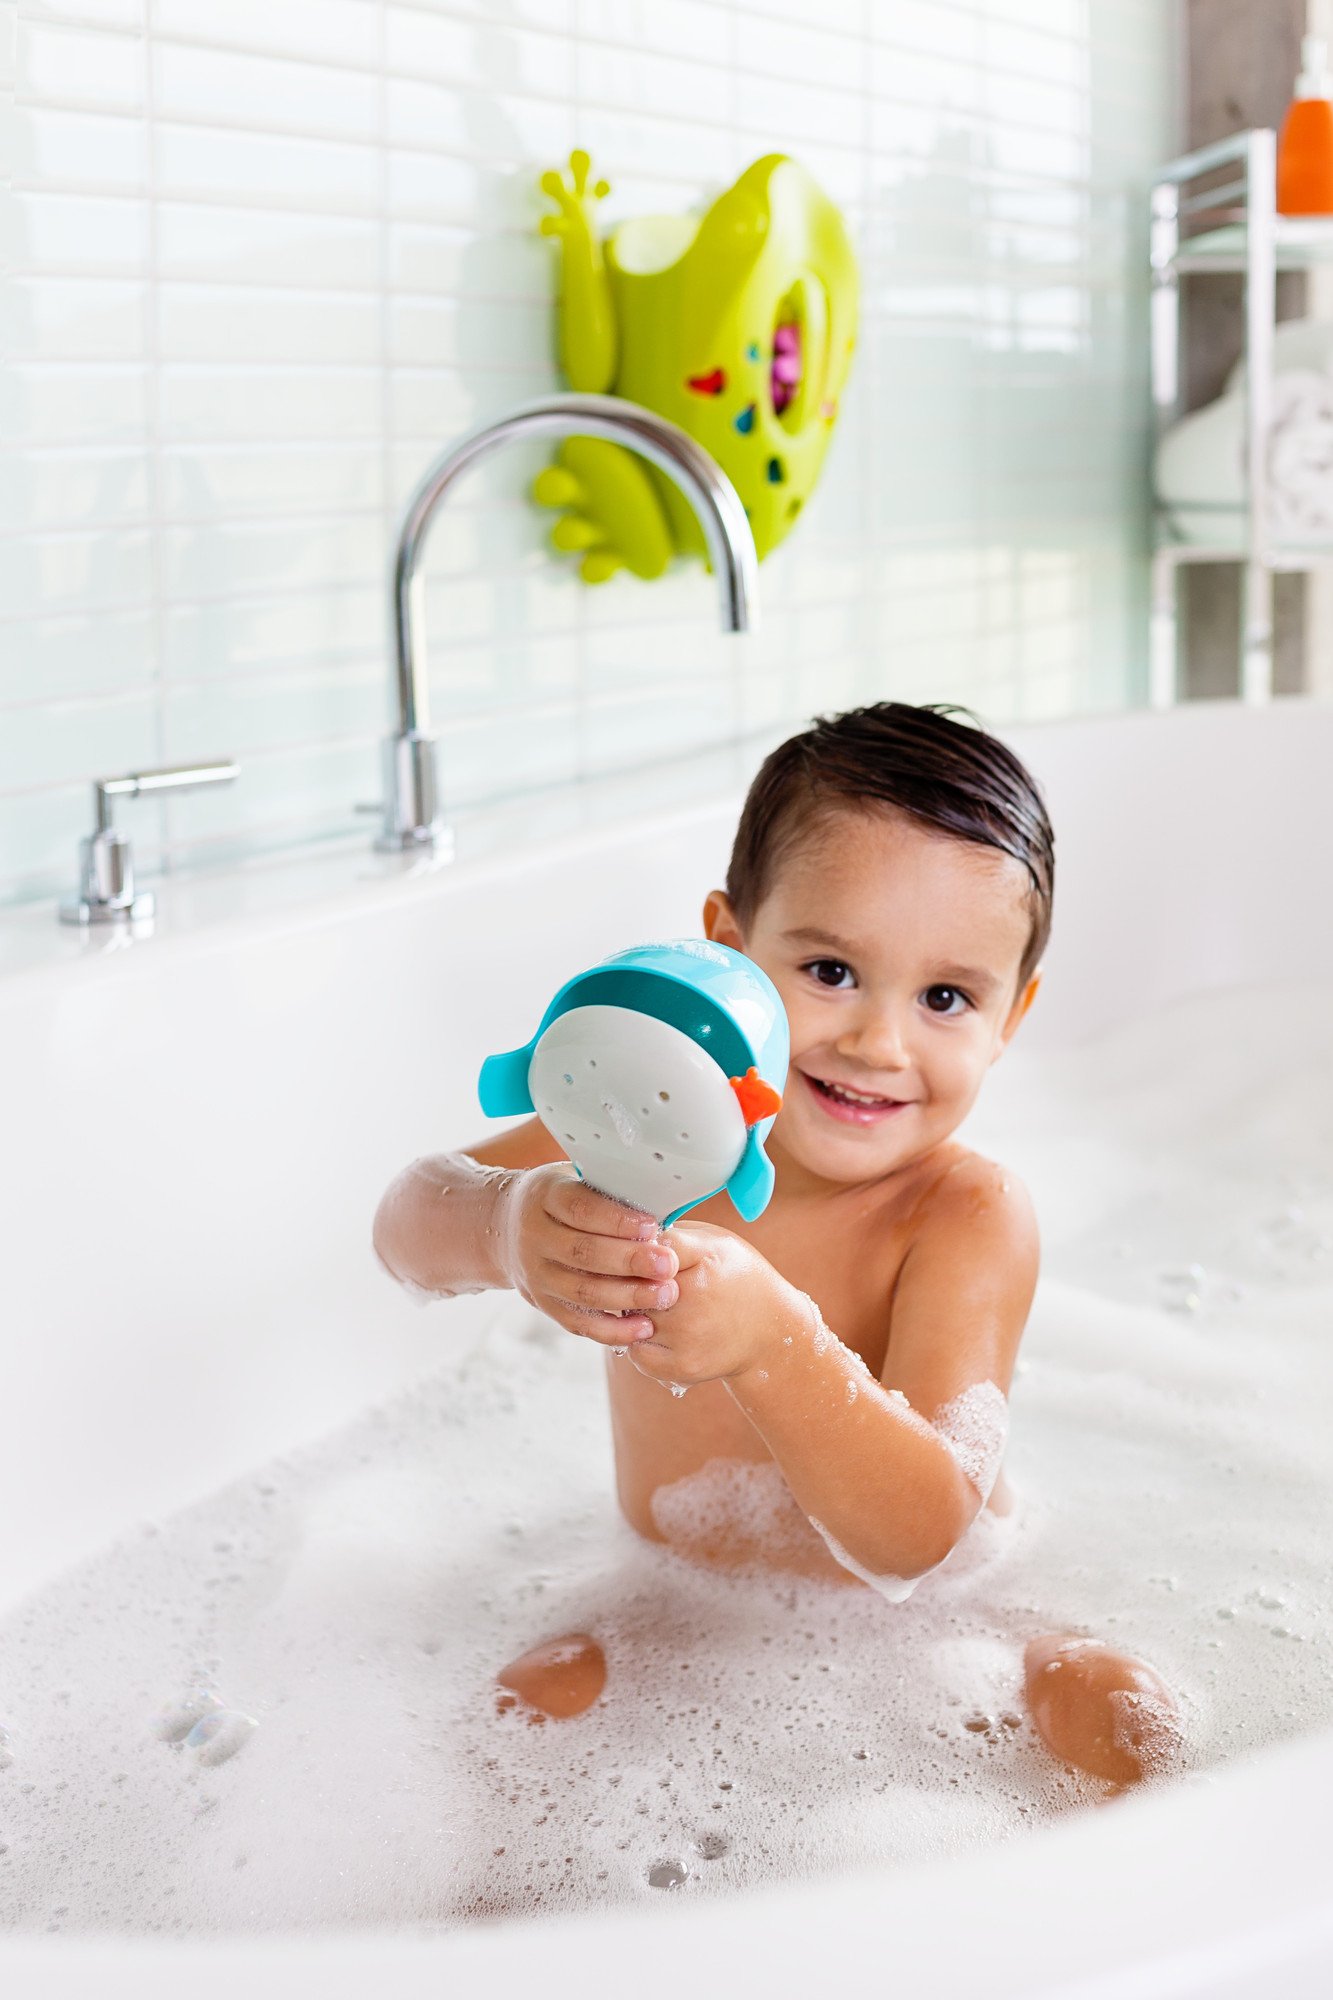 Boon CHOMP Whale Bath Toy - Sensory Toddler Toys - Aqua - Baby Bath Toys - Ages 12 Months and Up